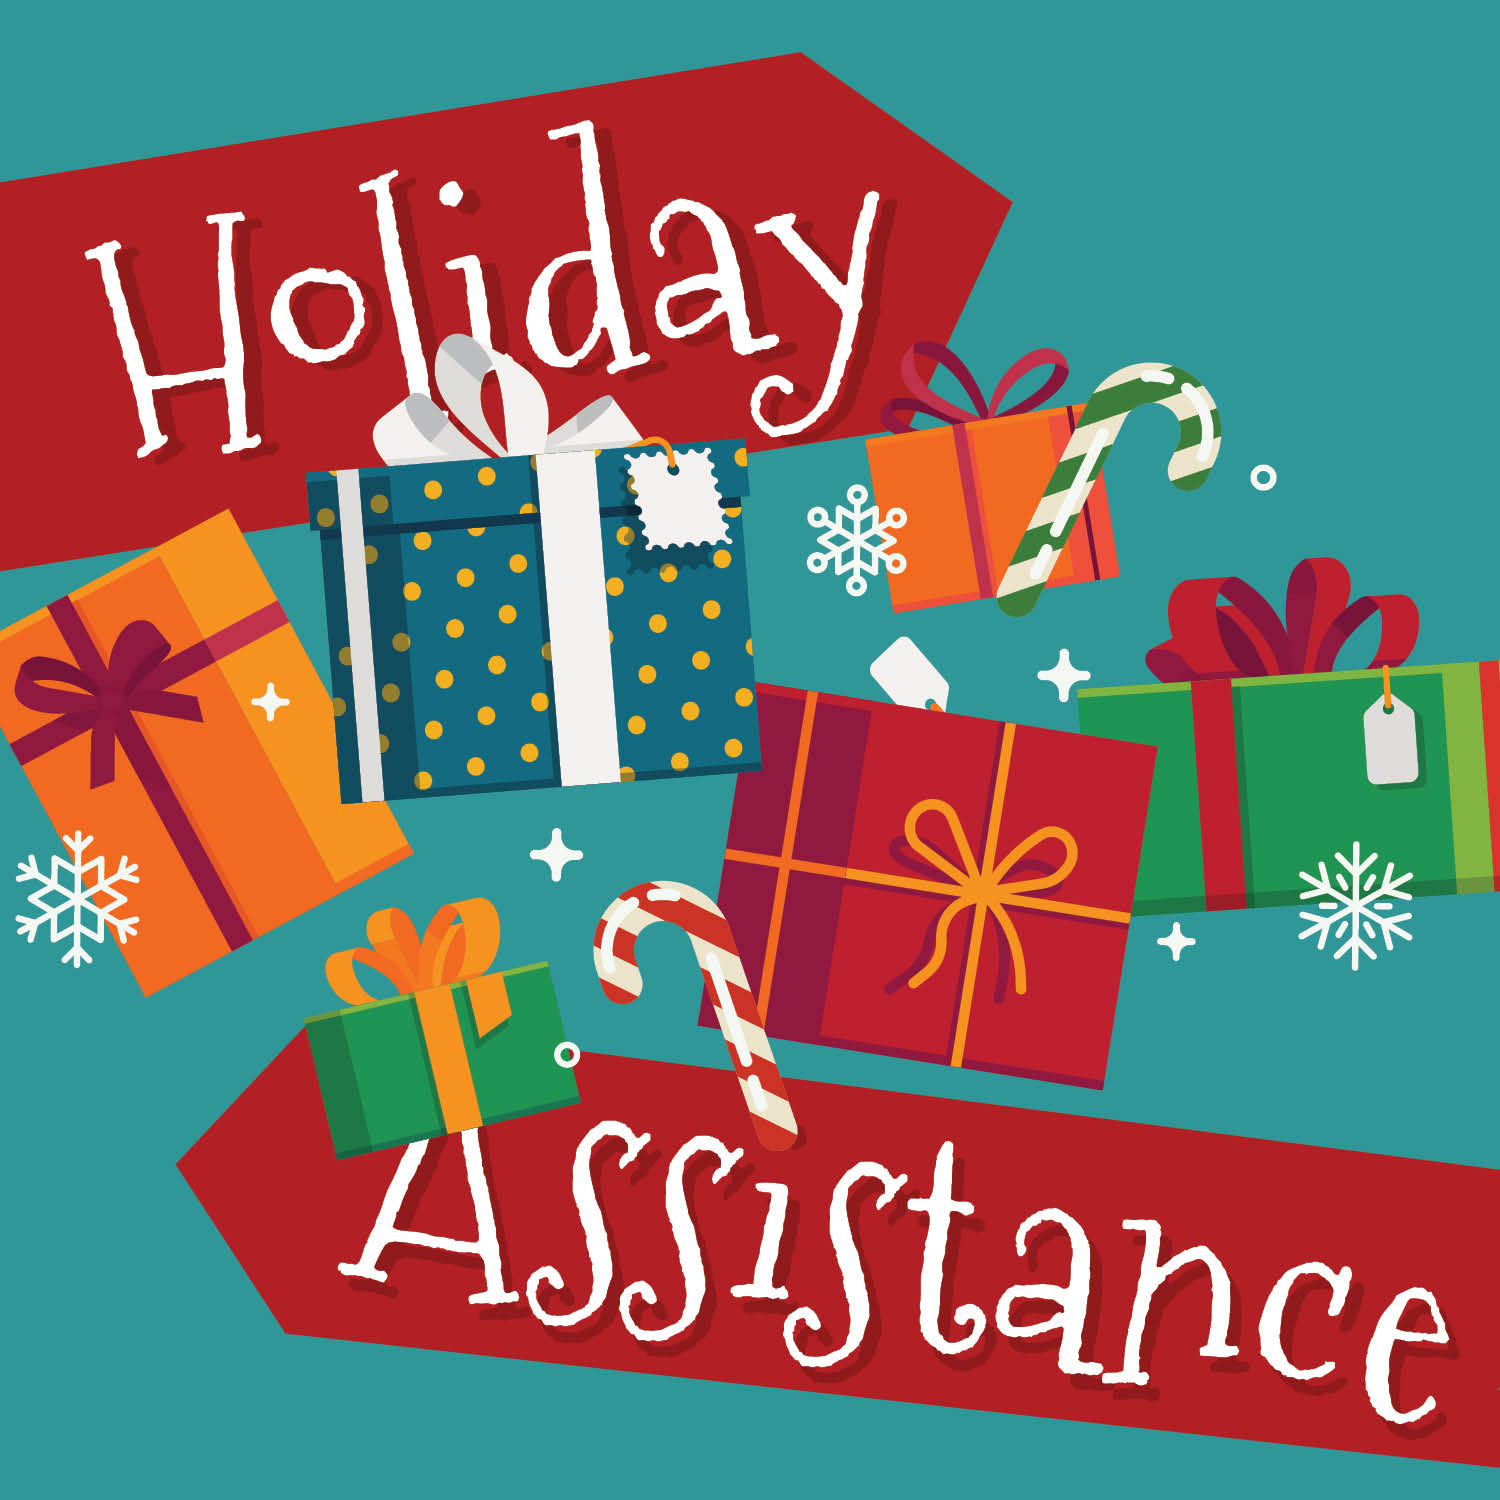 Holiday Assistance